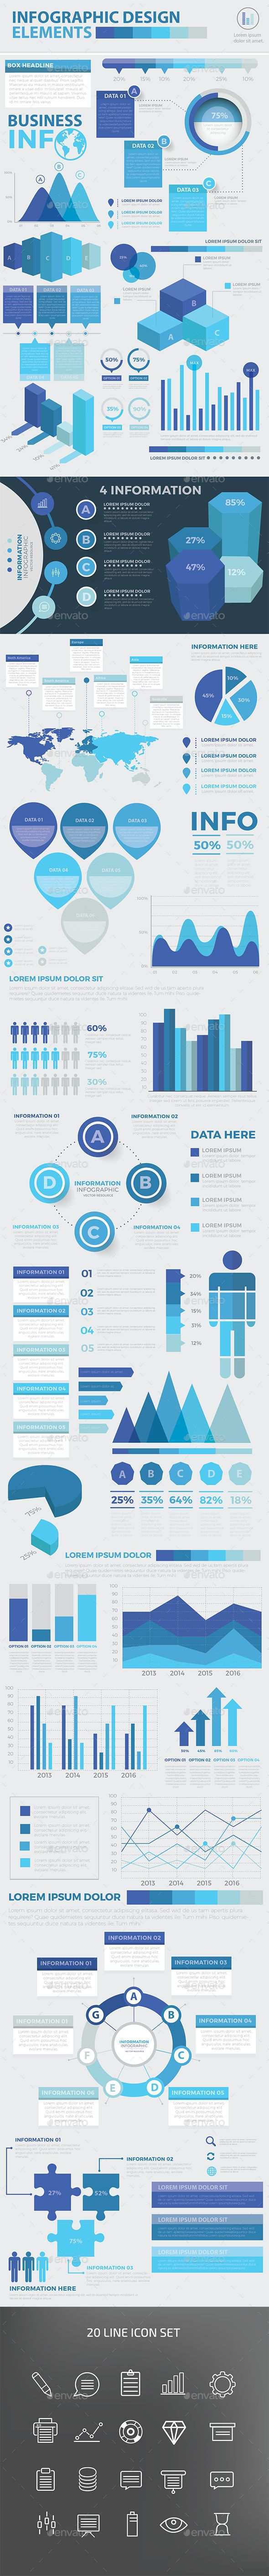 Modern Infographic Elements Design Infographic Data Visualization Infographic Infographic Templates